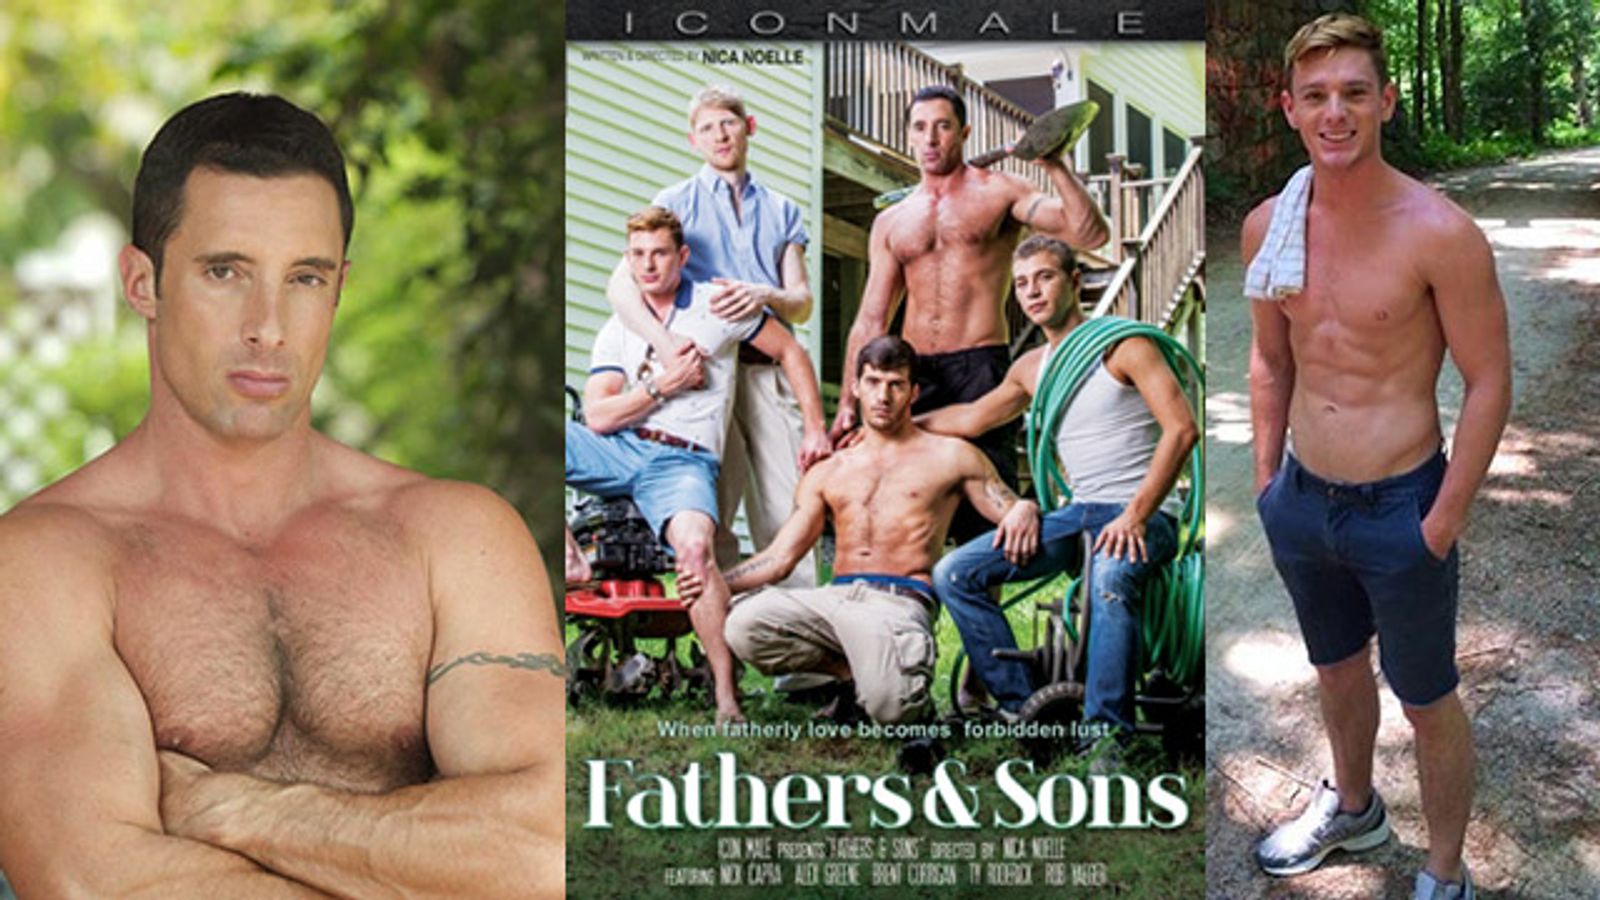 Icon Male Releases Edgy 'Fathers & Sons'